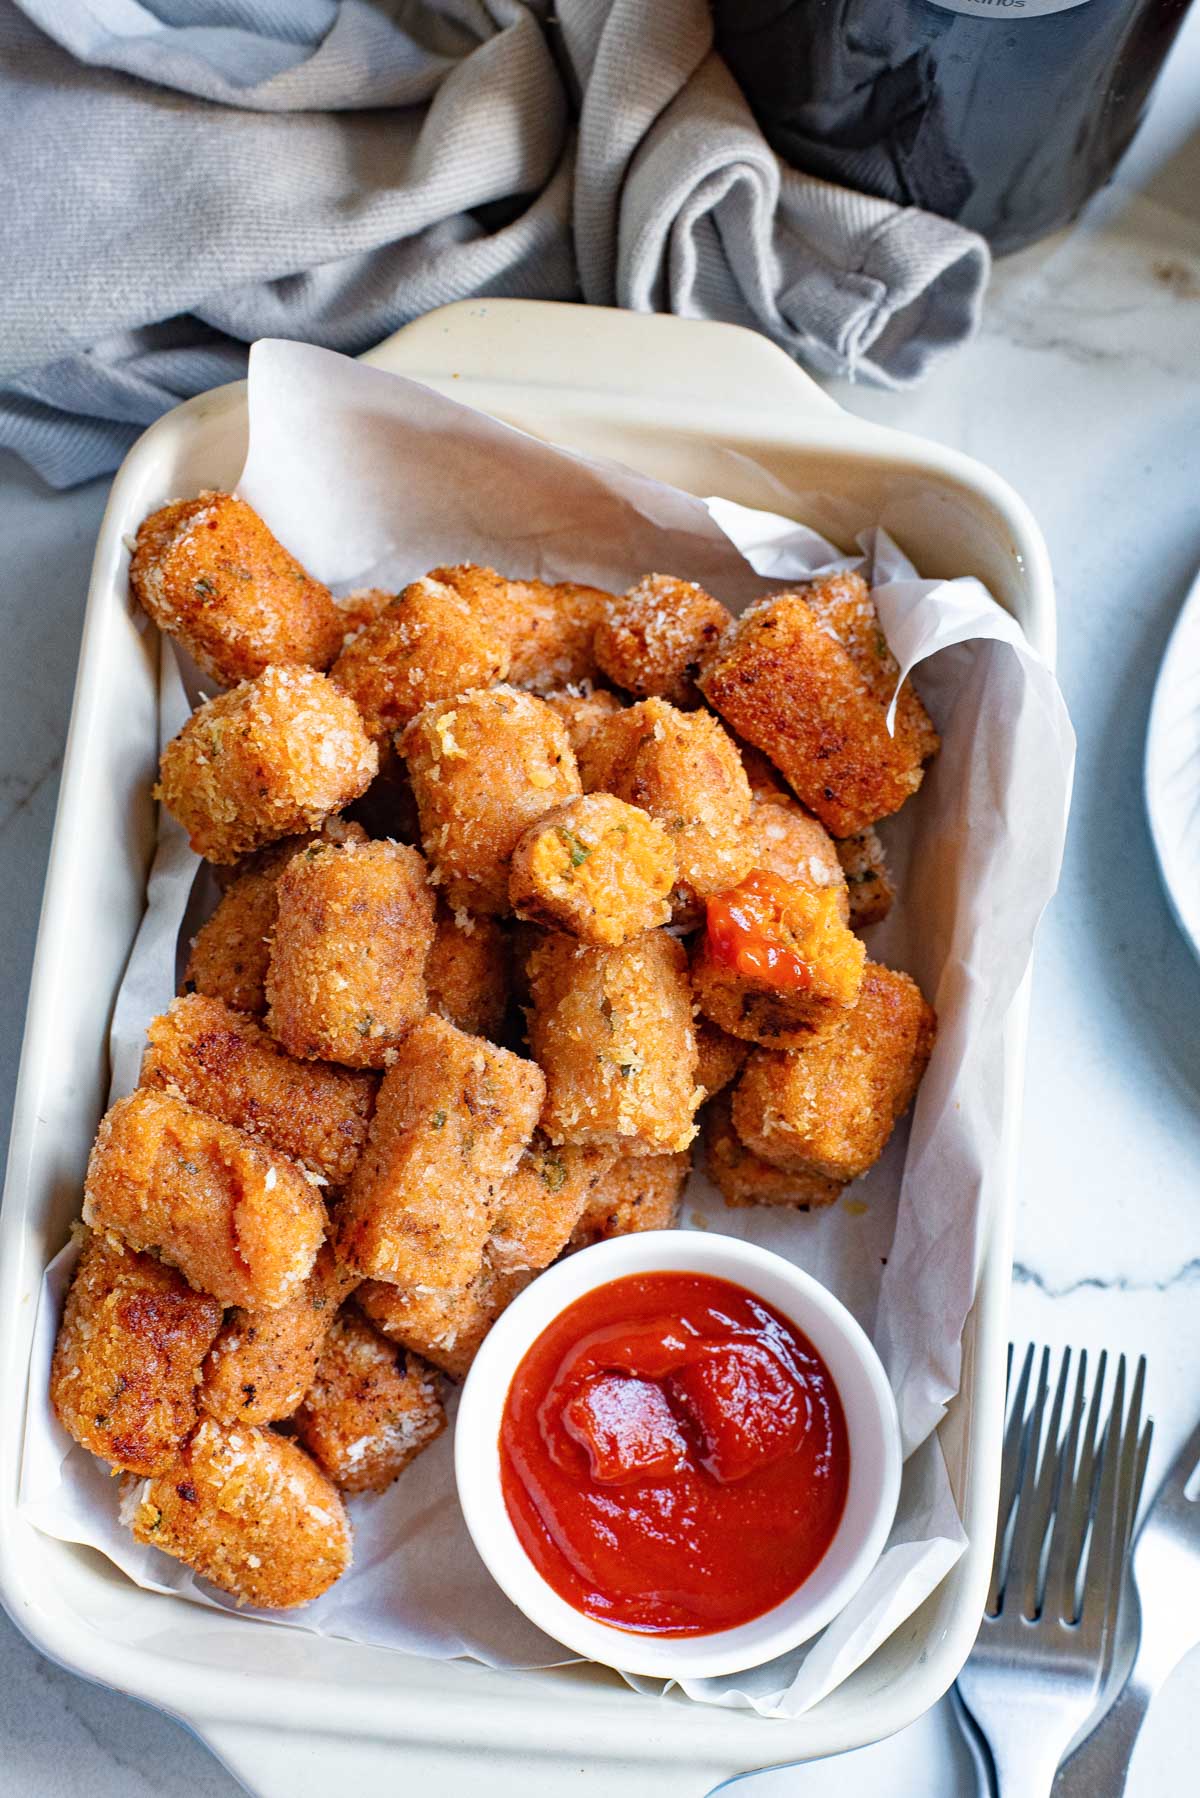 the finished sweet potato tater tots recipe served in a white dish with a side of sauce